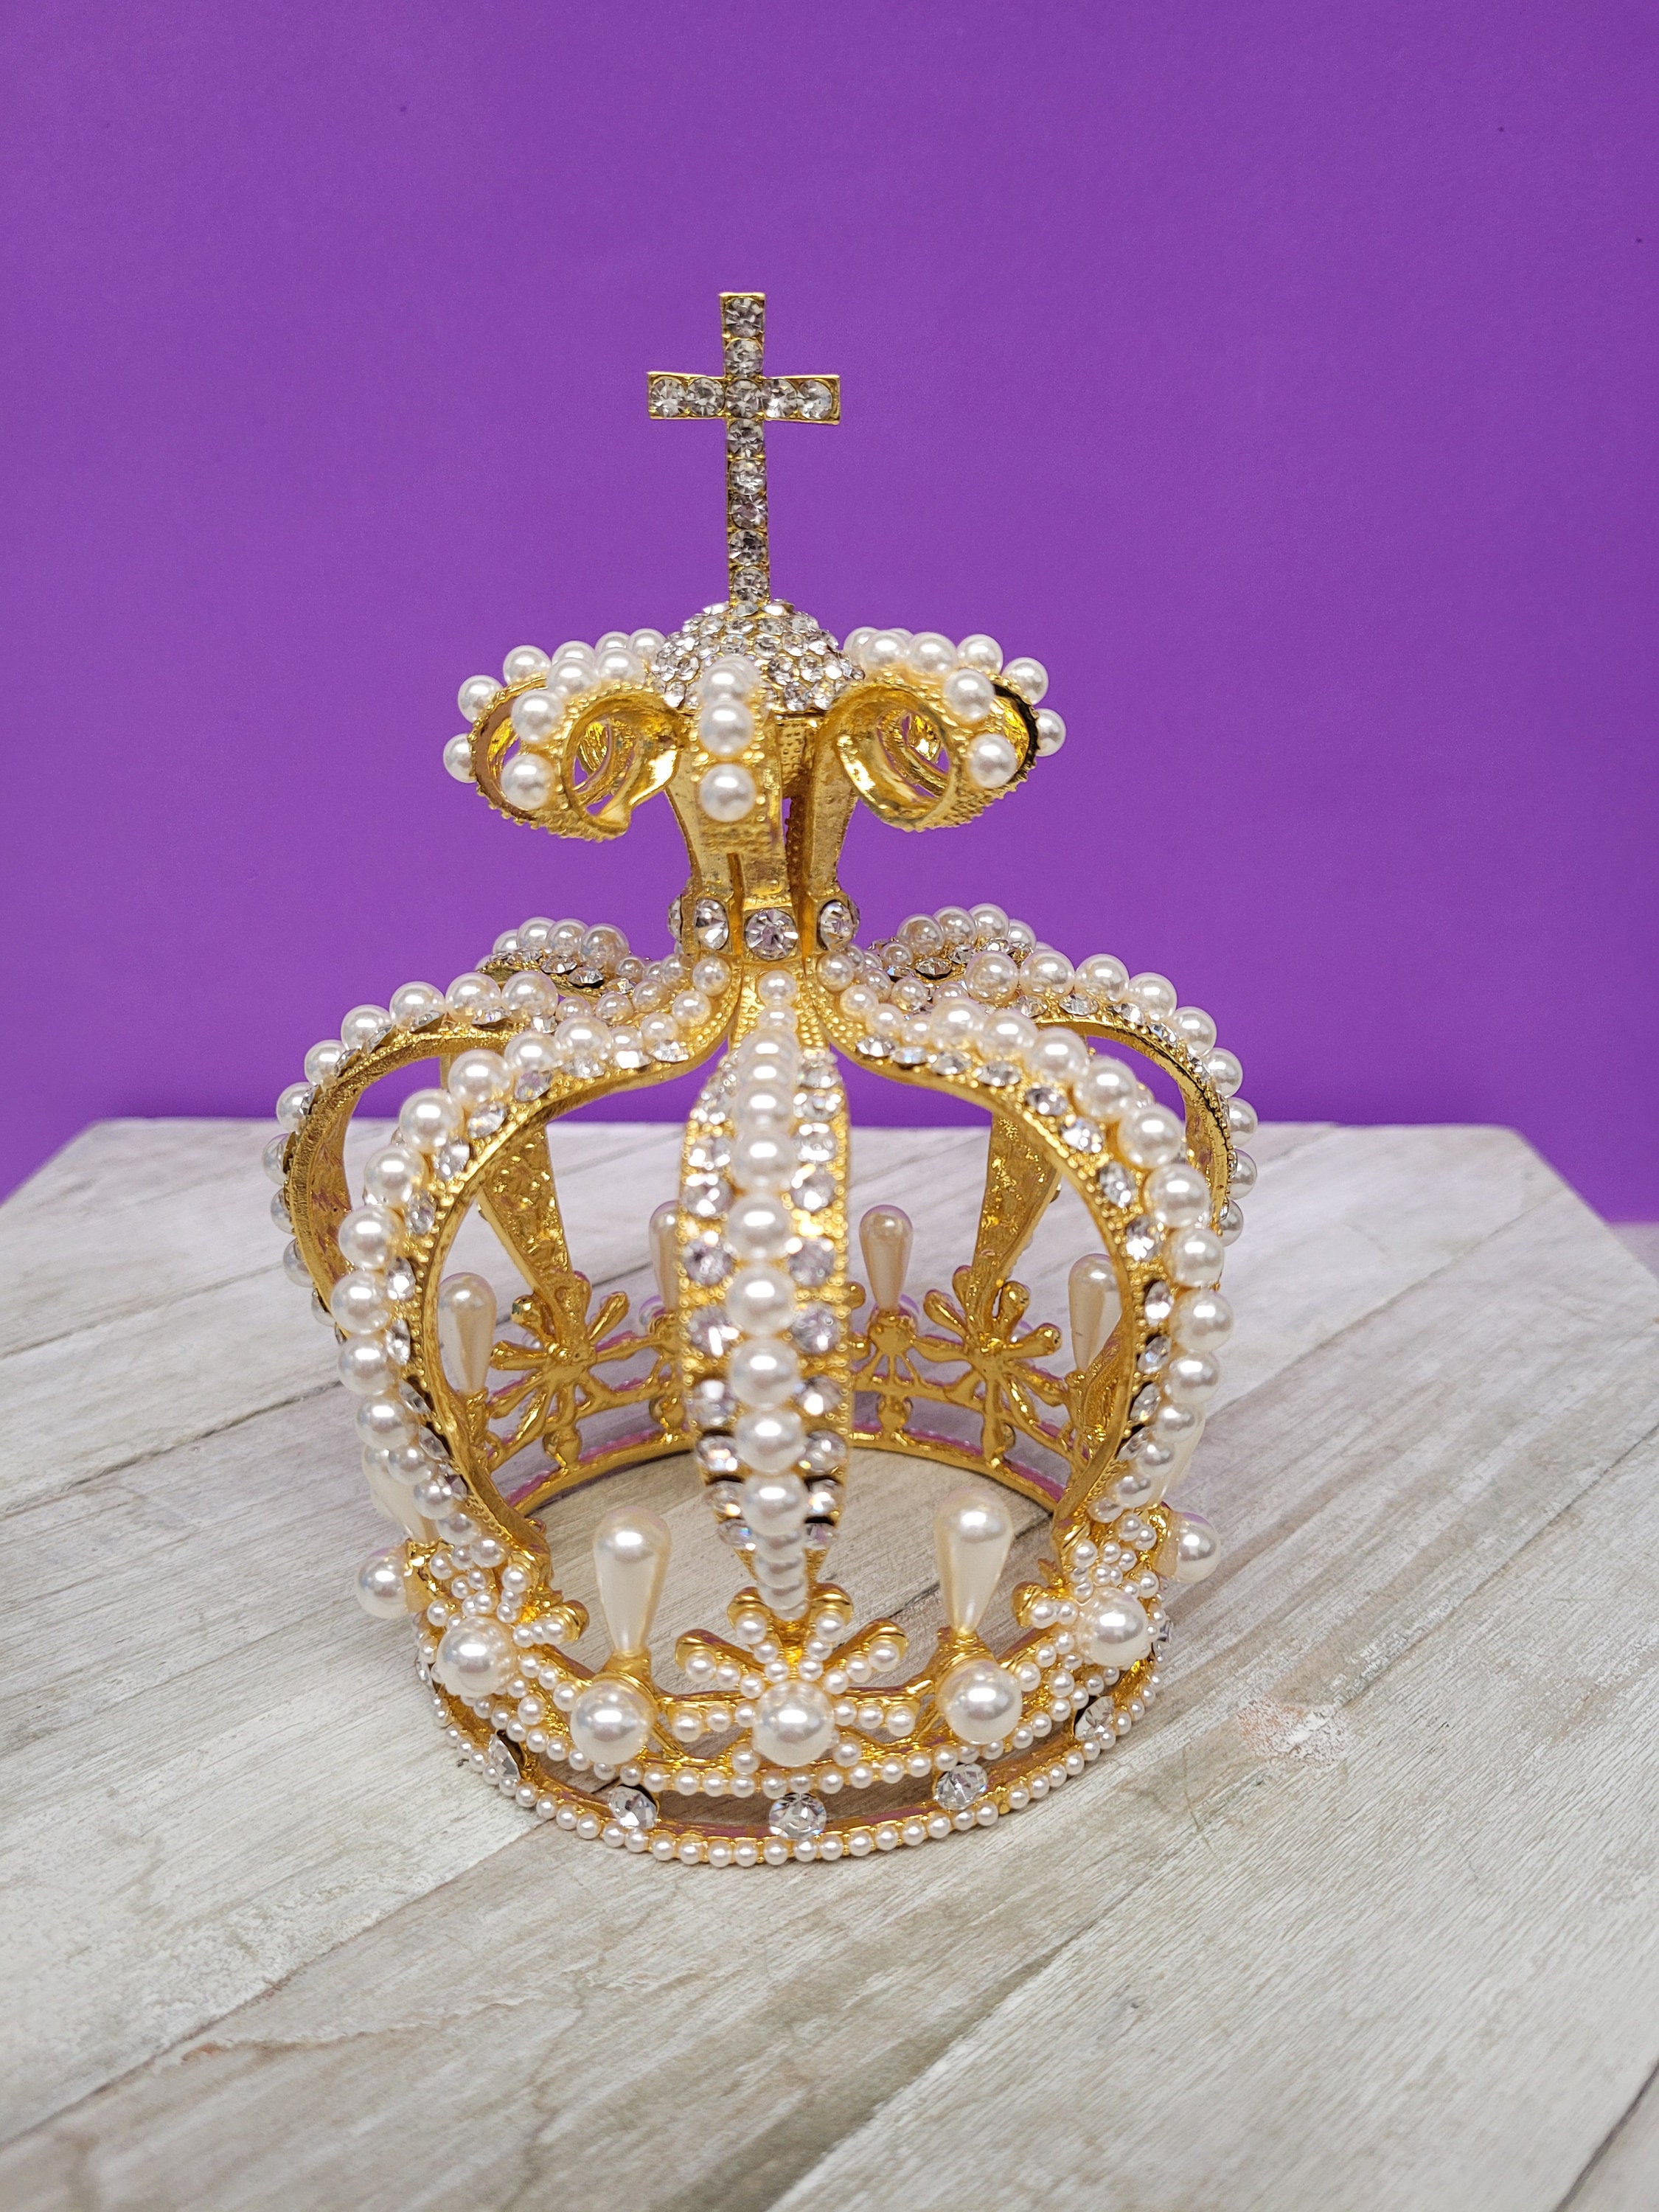 Silver MINI Crown Tiara Cake Topper for Baby Shower Birthday Princess Party Wedding Cake Decorations Tiara for Children Hair Ornaments